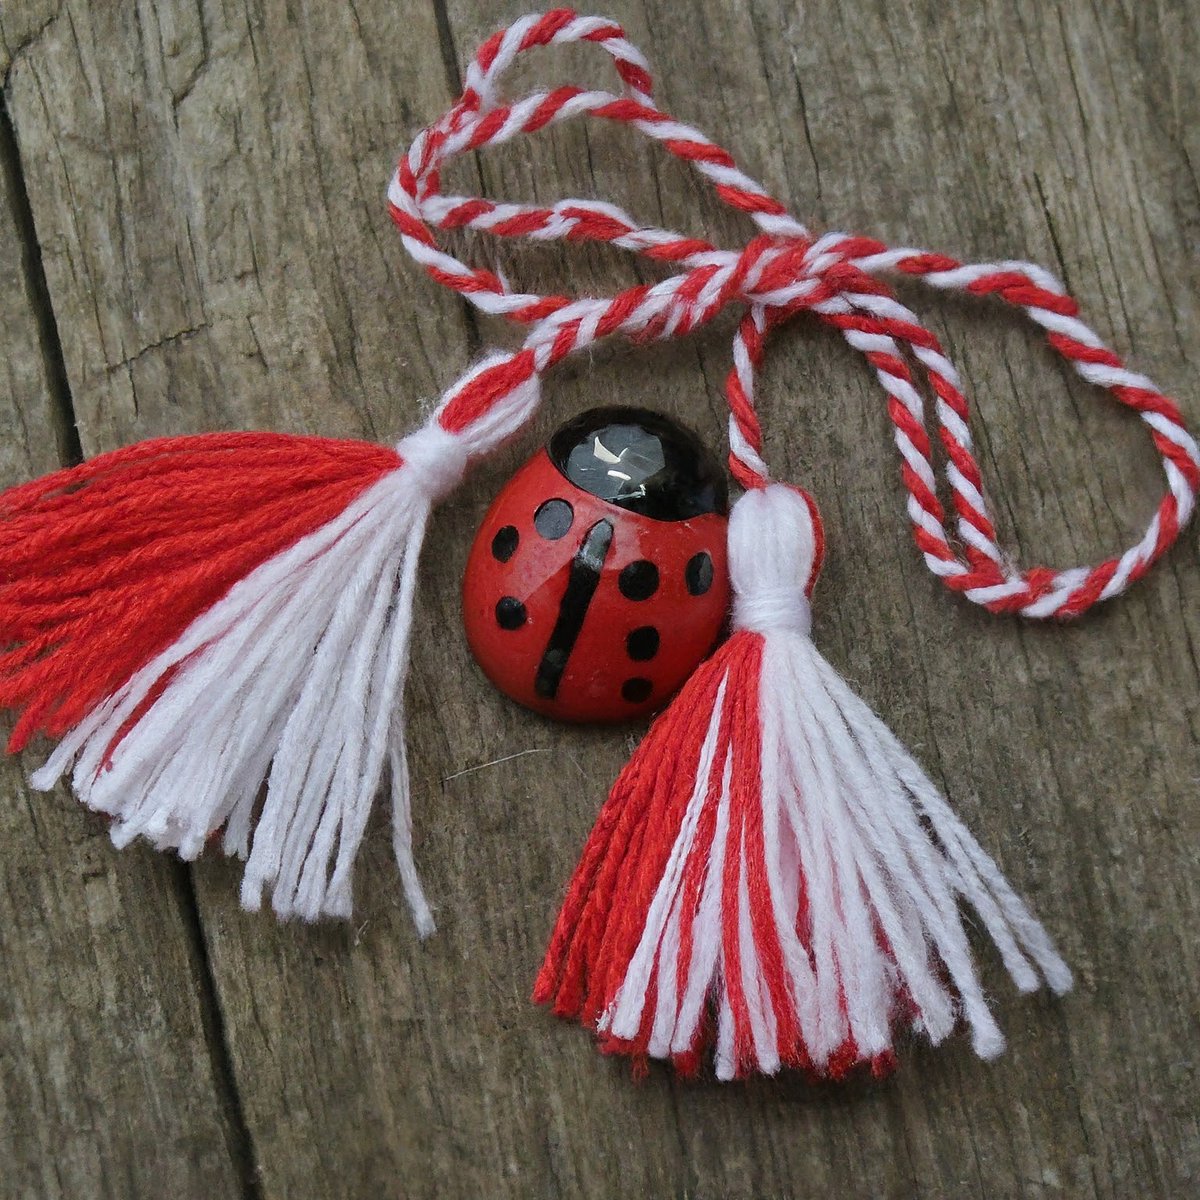 Happy #Martisor! Wearing my red & white thread with a smile, remembering the joy of spring celebrations back home in #Romania. Wishing everyone luck, health, and a beautiful year! #SpringTraditions P.S. Do other countries have similar traditions to celebrate spring?